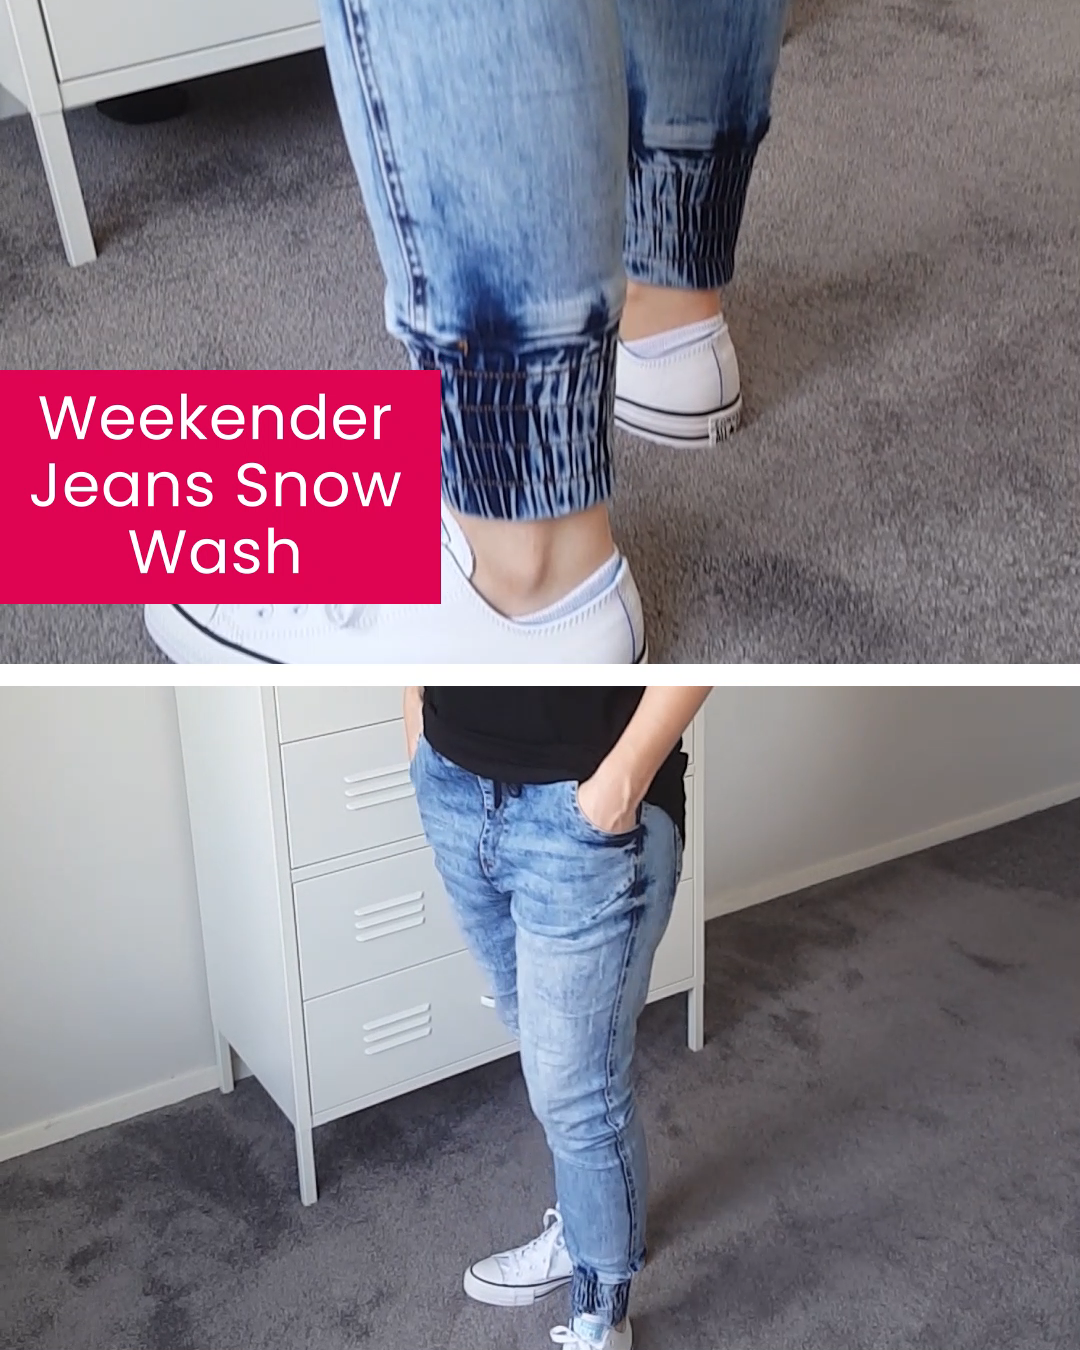 NZ's #1 Cool Comfy Jeans | AfterPay | LayBuy | Free Returns - NZ's #1 Cool Comfy Jeans | AfterPay | LayBuy | Free Returns -   24 style Jeans videos ideas